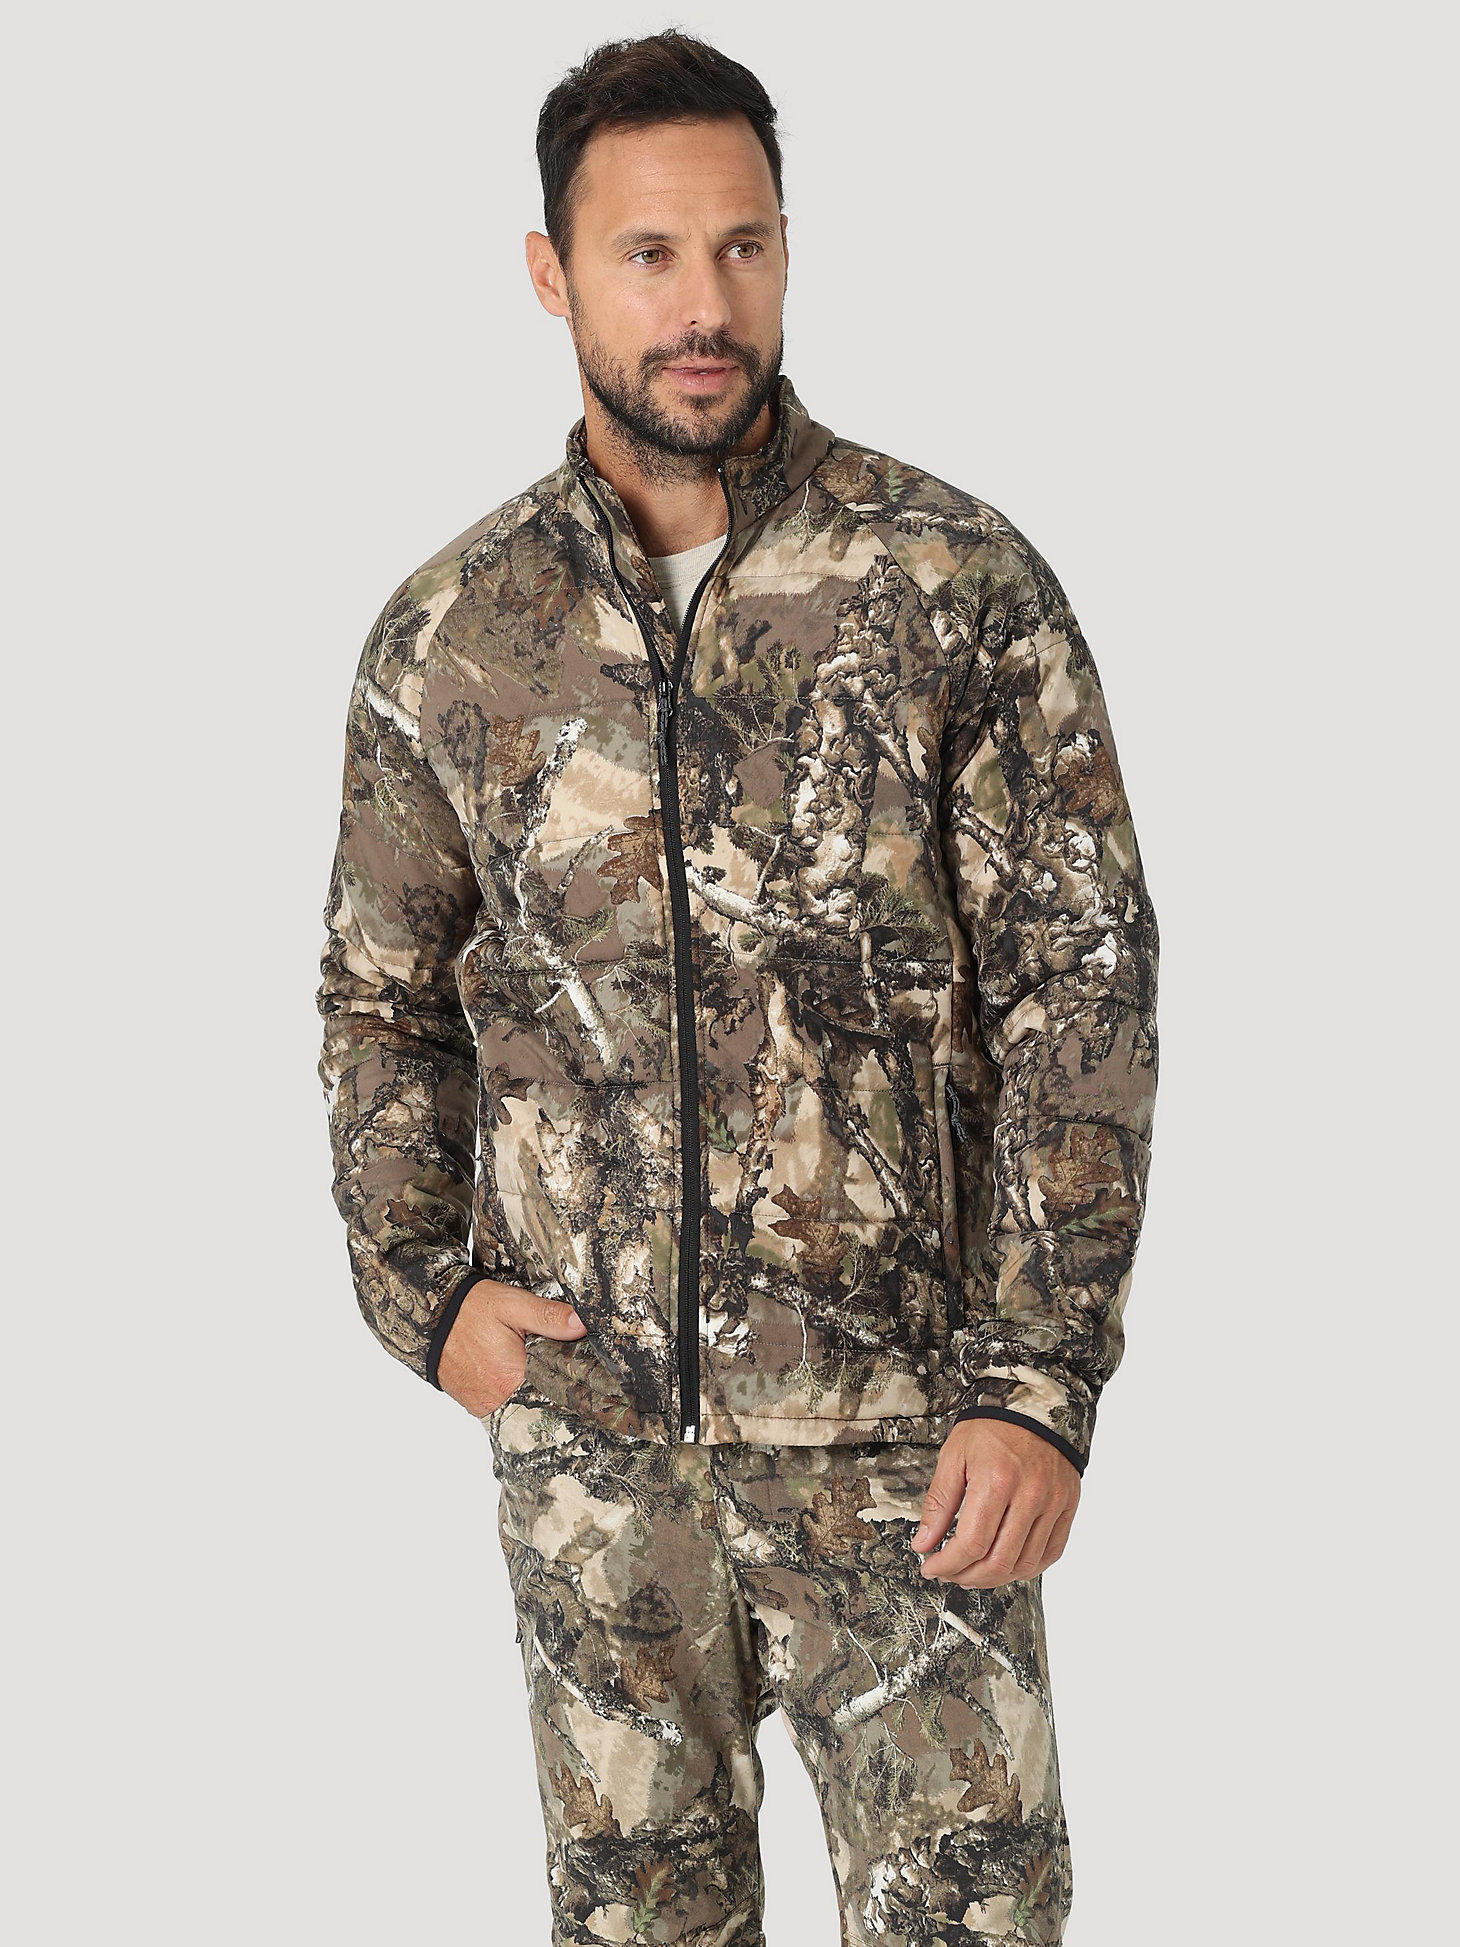 ATG Hunter™ Mid Layer Camo Jacket in Warmwoods Camo main view